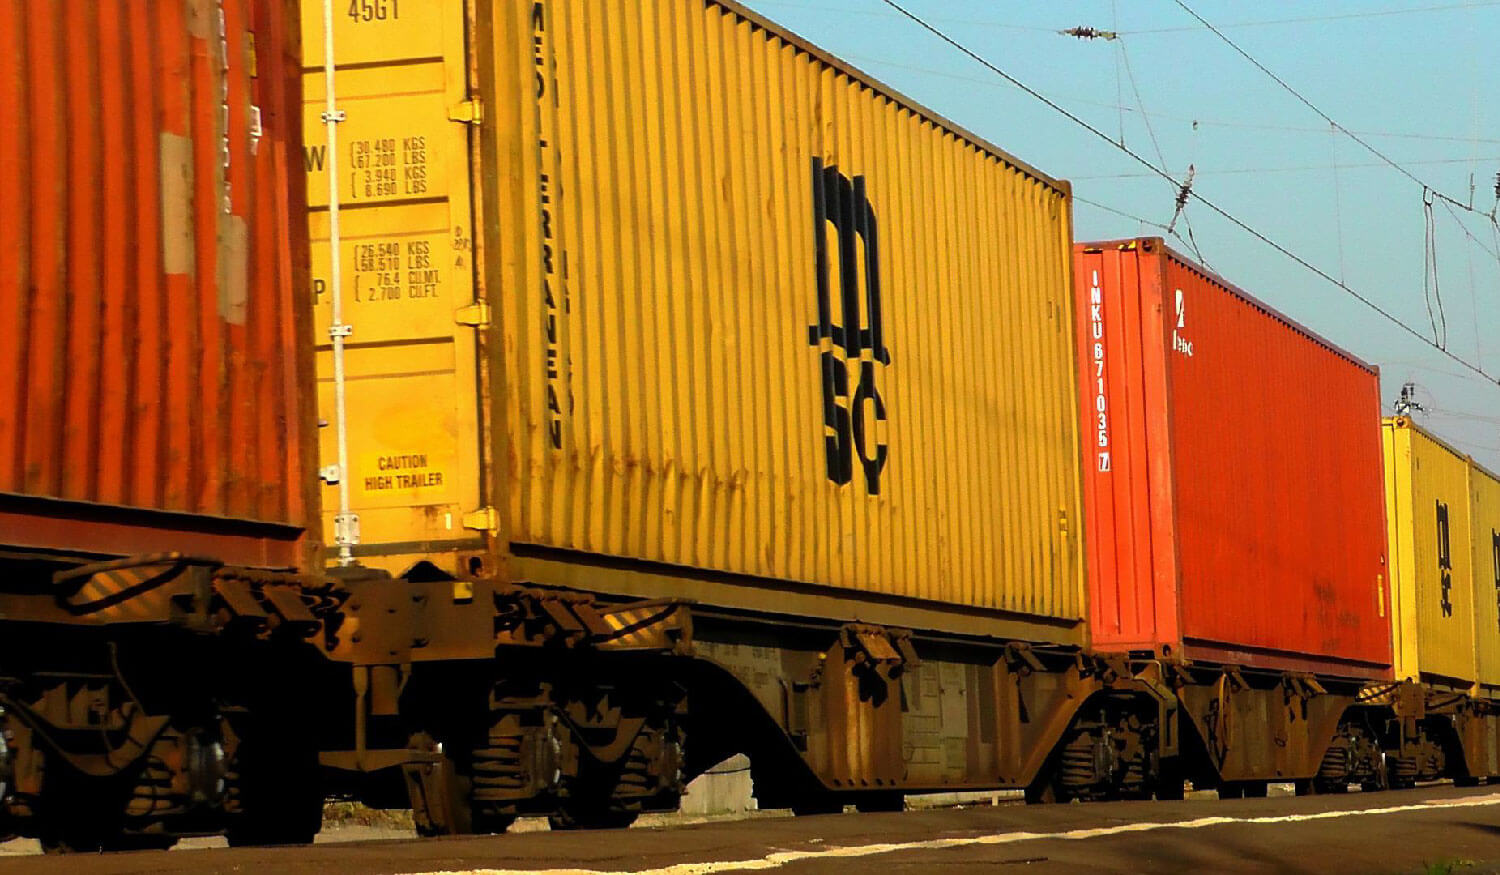 Cost of Intermodal Transportation Services - Rates, Fees & Variables